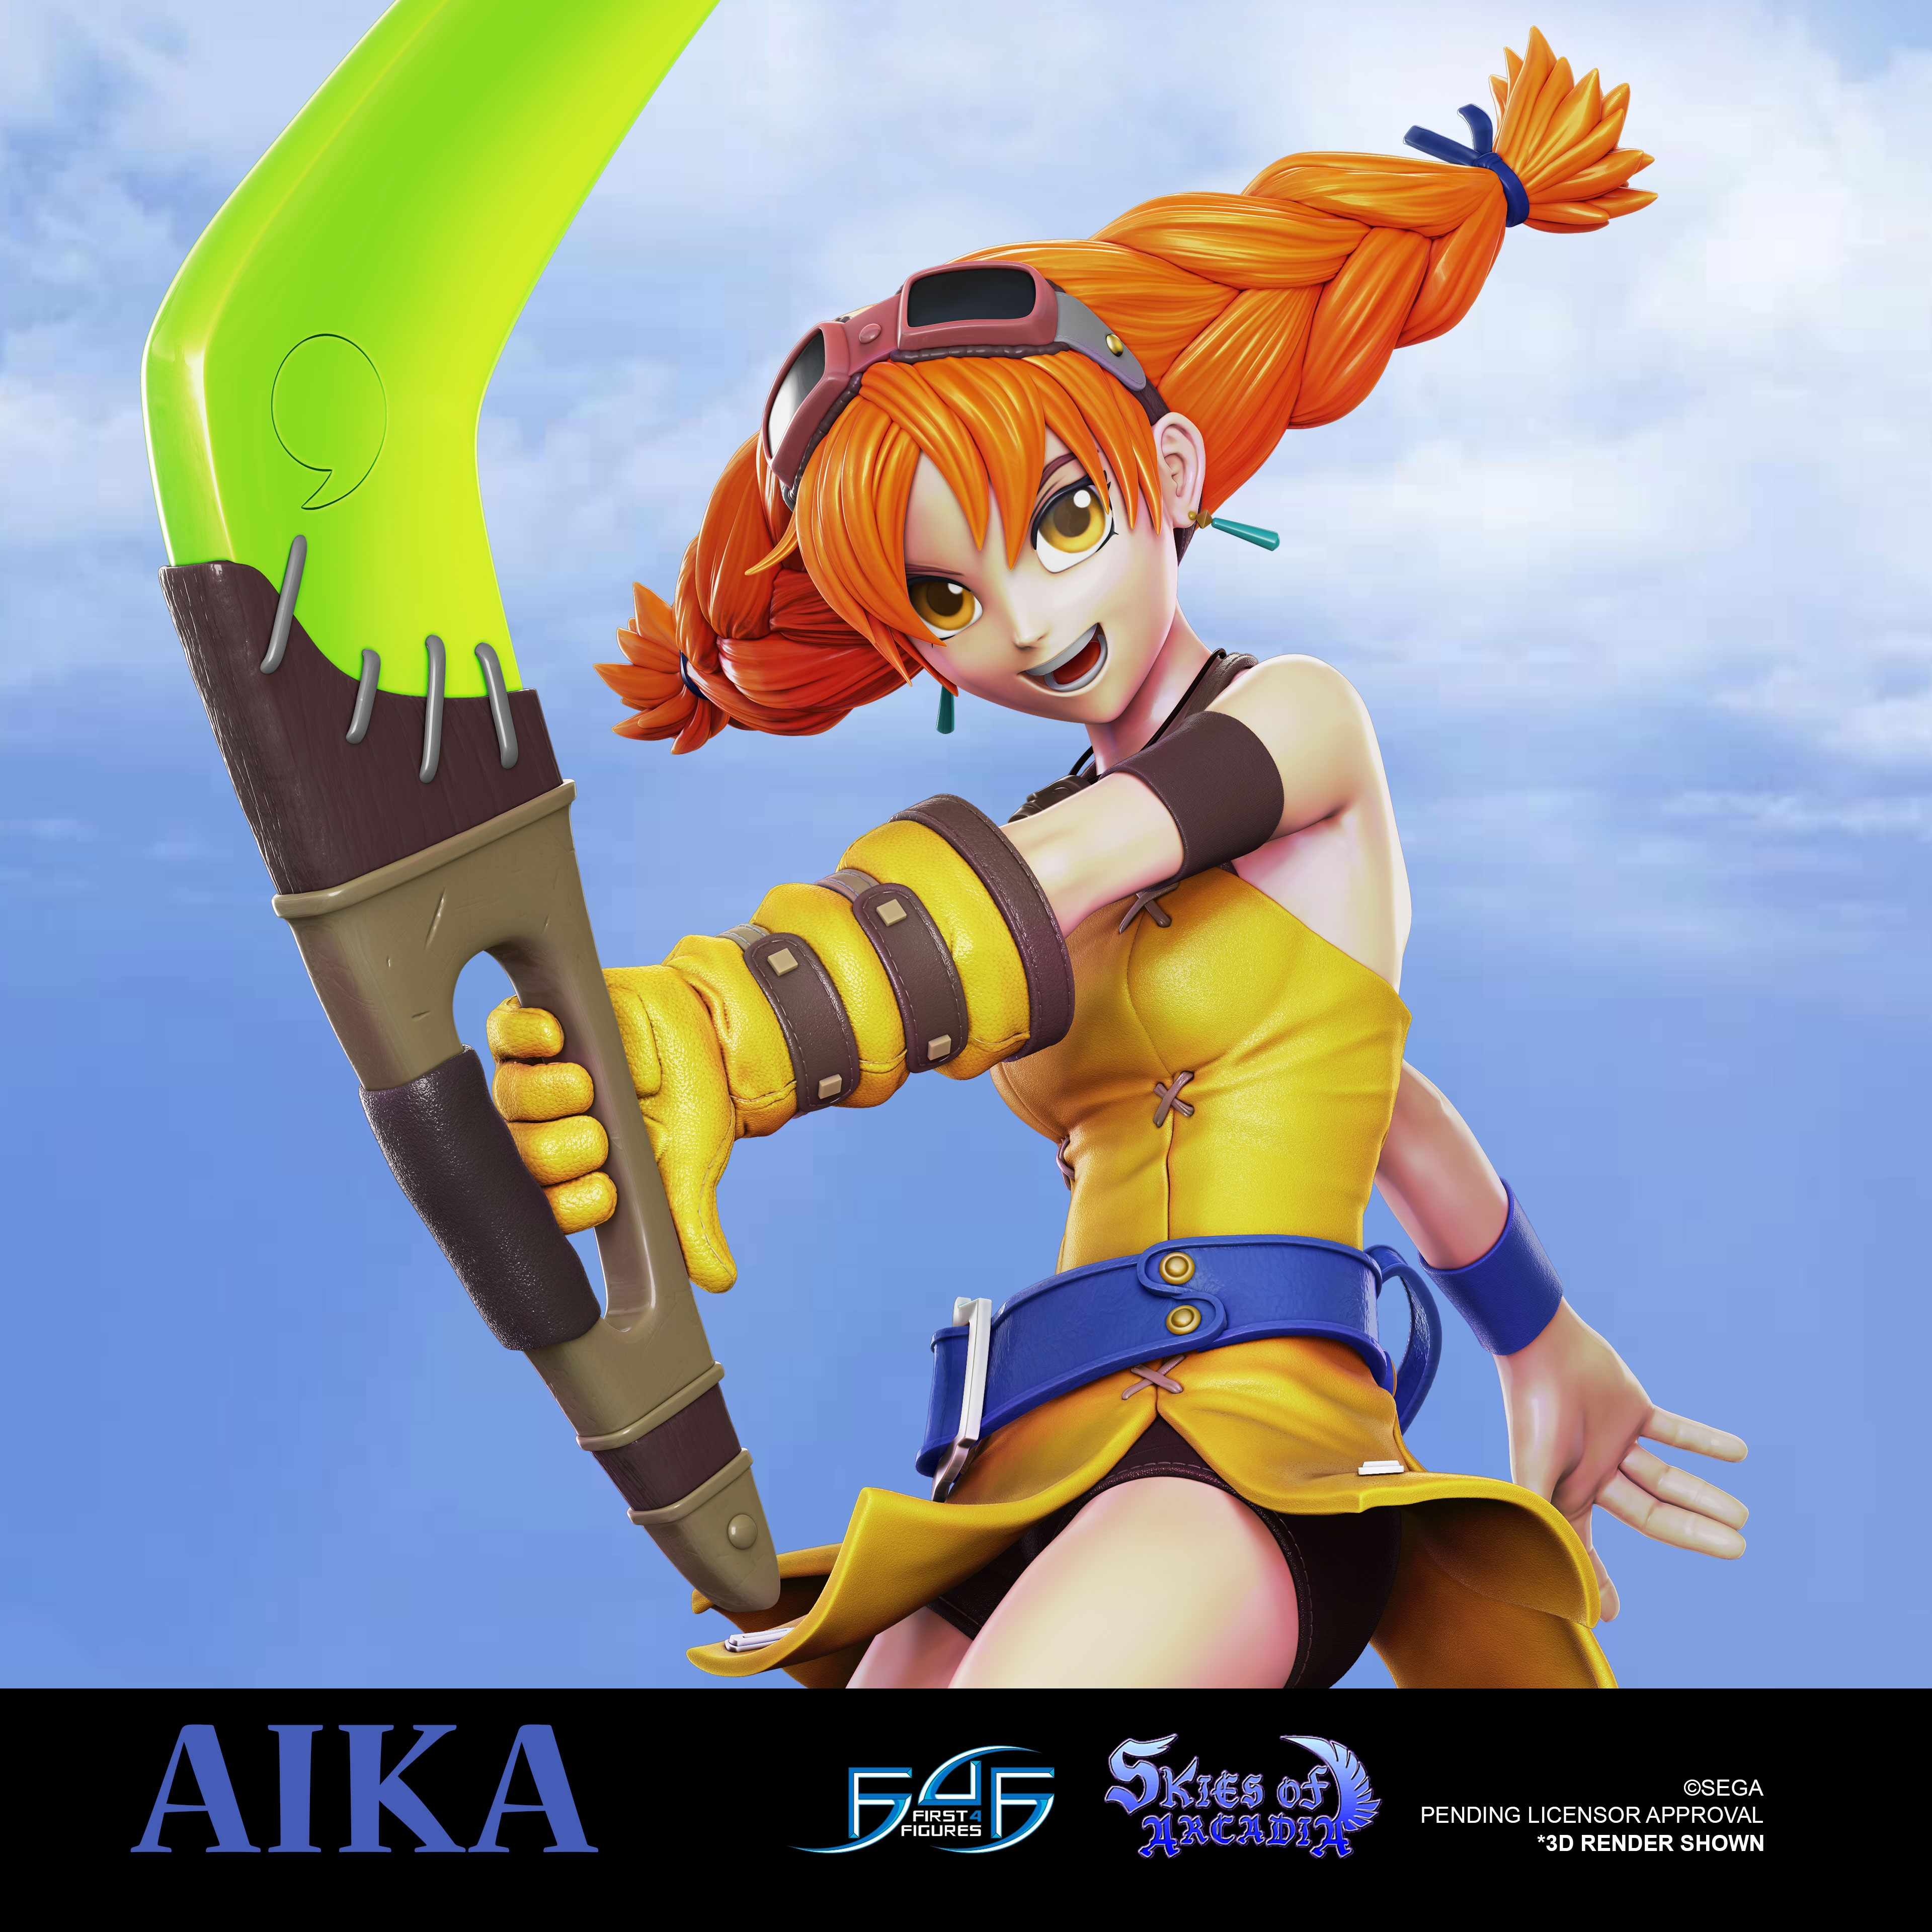 A First Look at First 4 Figures' Skies of Arcadia – Aika Statue